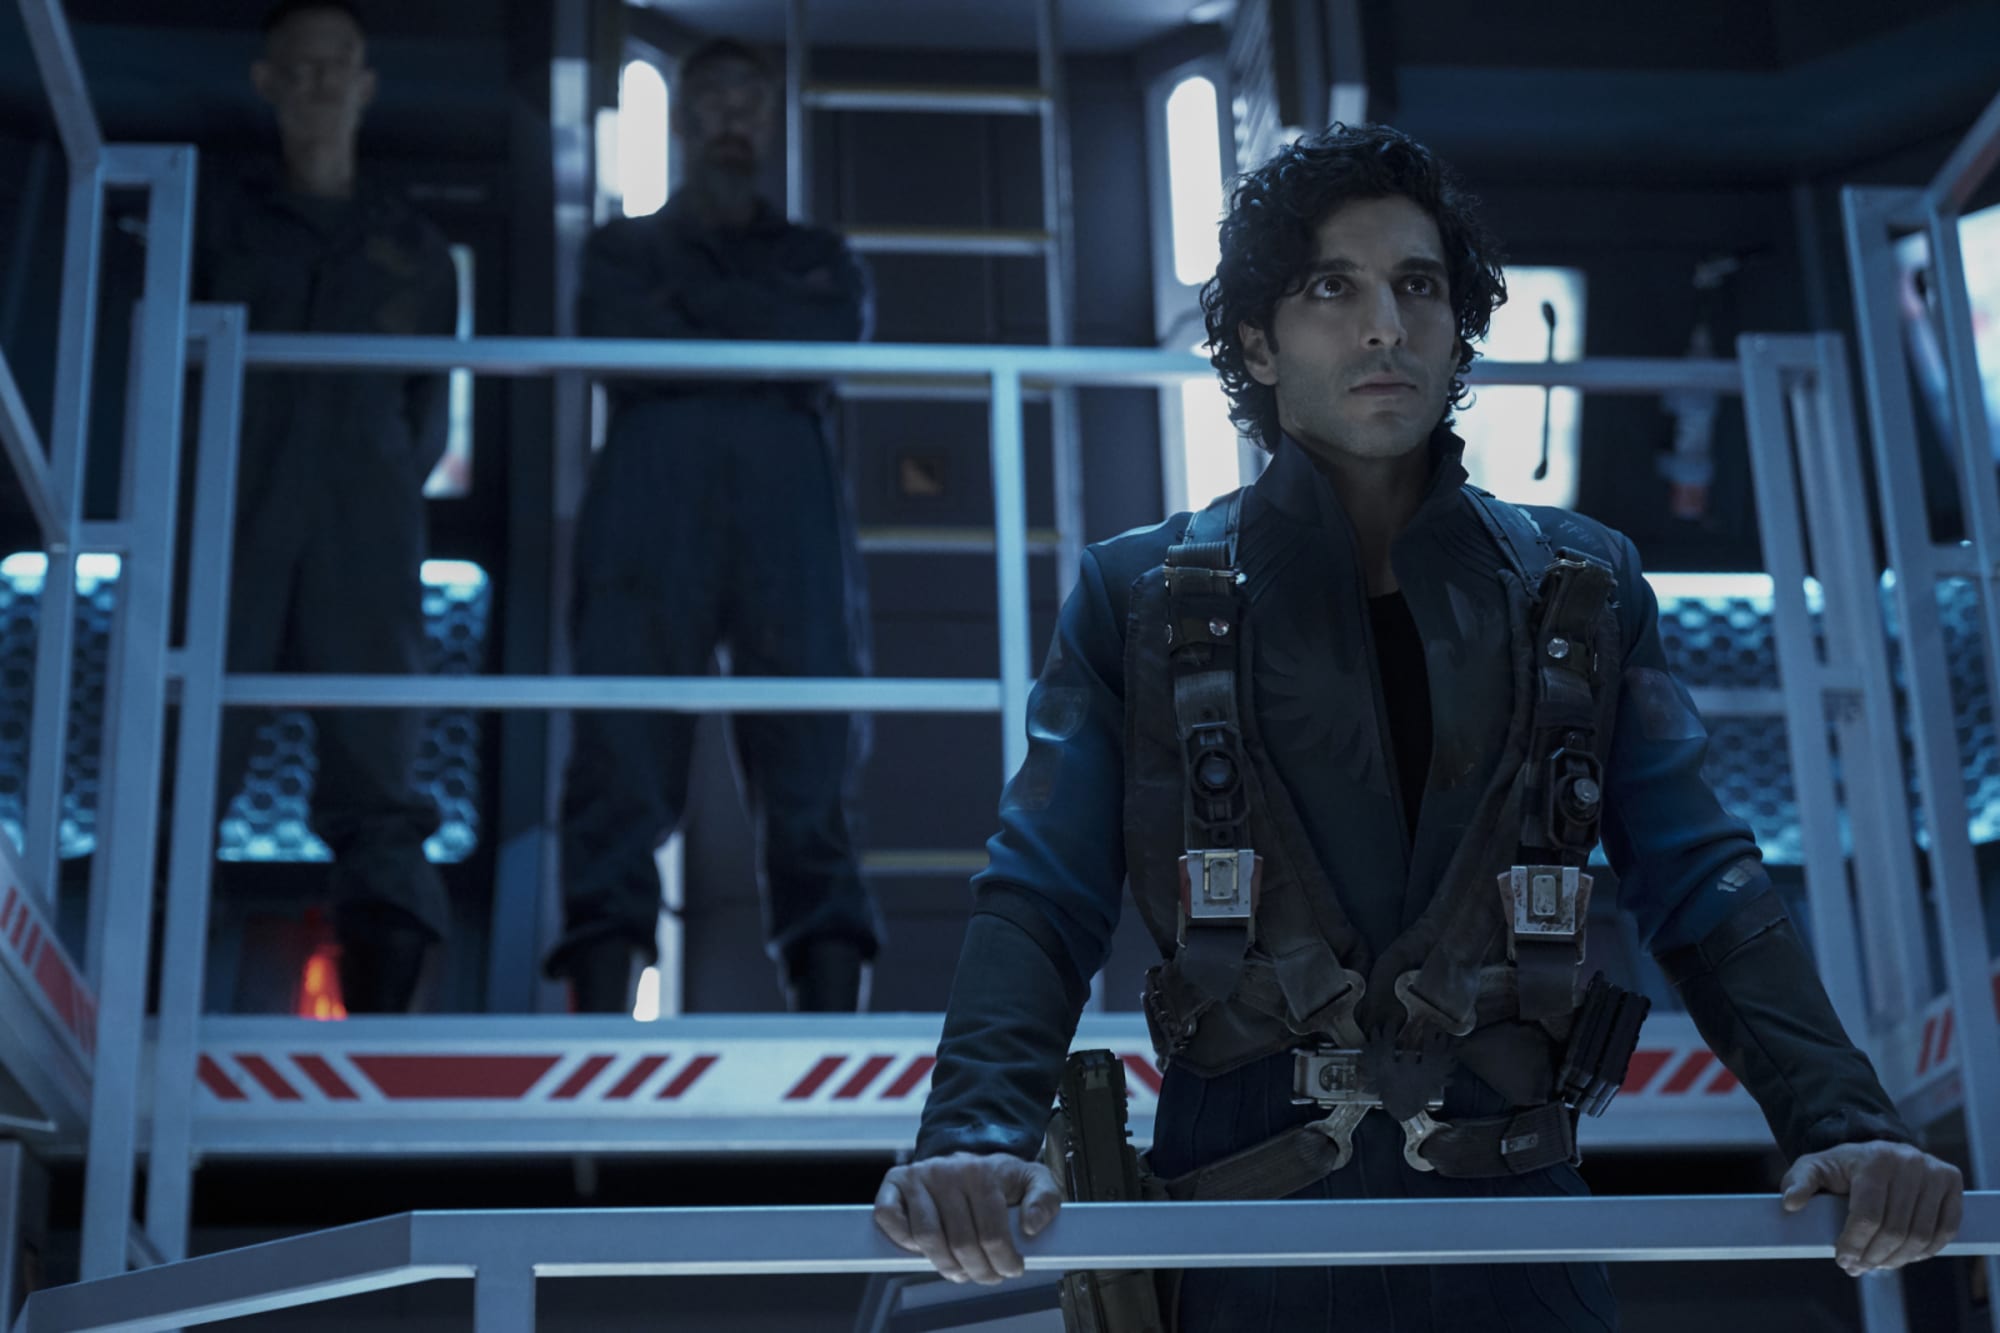 The Expanse Season 6 is not coming to Amazon in July 2021